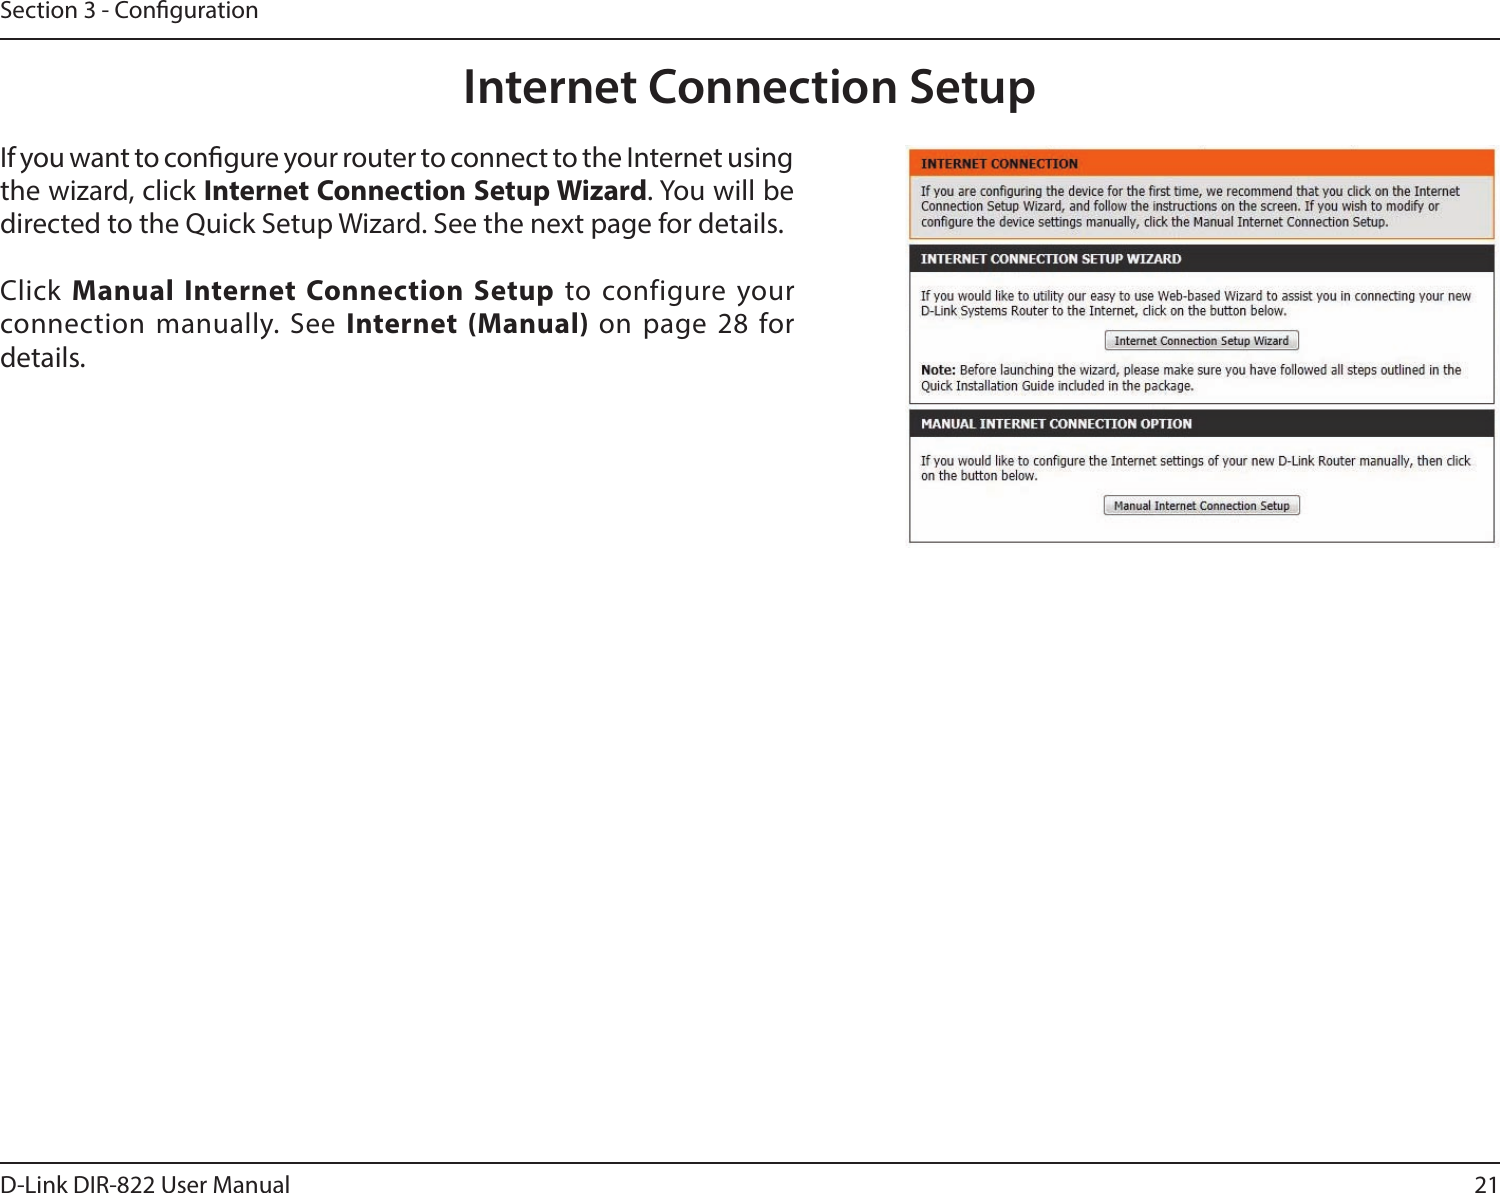 21D-Link DIR-822 User ManualSection 3 - CongurationInternet Connection SetupIf you want to congure your router to connect to the Internet using the wizard, click InternetConnectionSetupWizard. You will be directed to the Quick Setup Wizard. See the next page for details.Click  Manual Internet Connection Setup to configure your connection manually. See Internet (Manual) on page 28 for details.